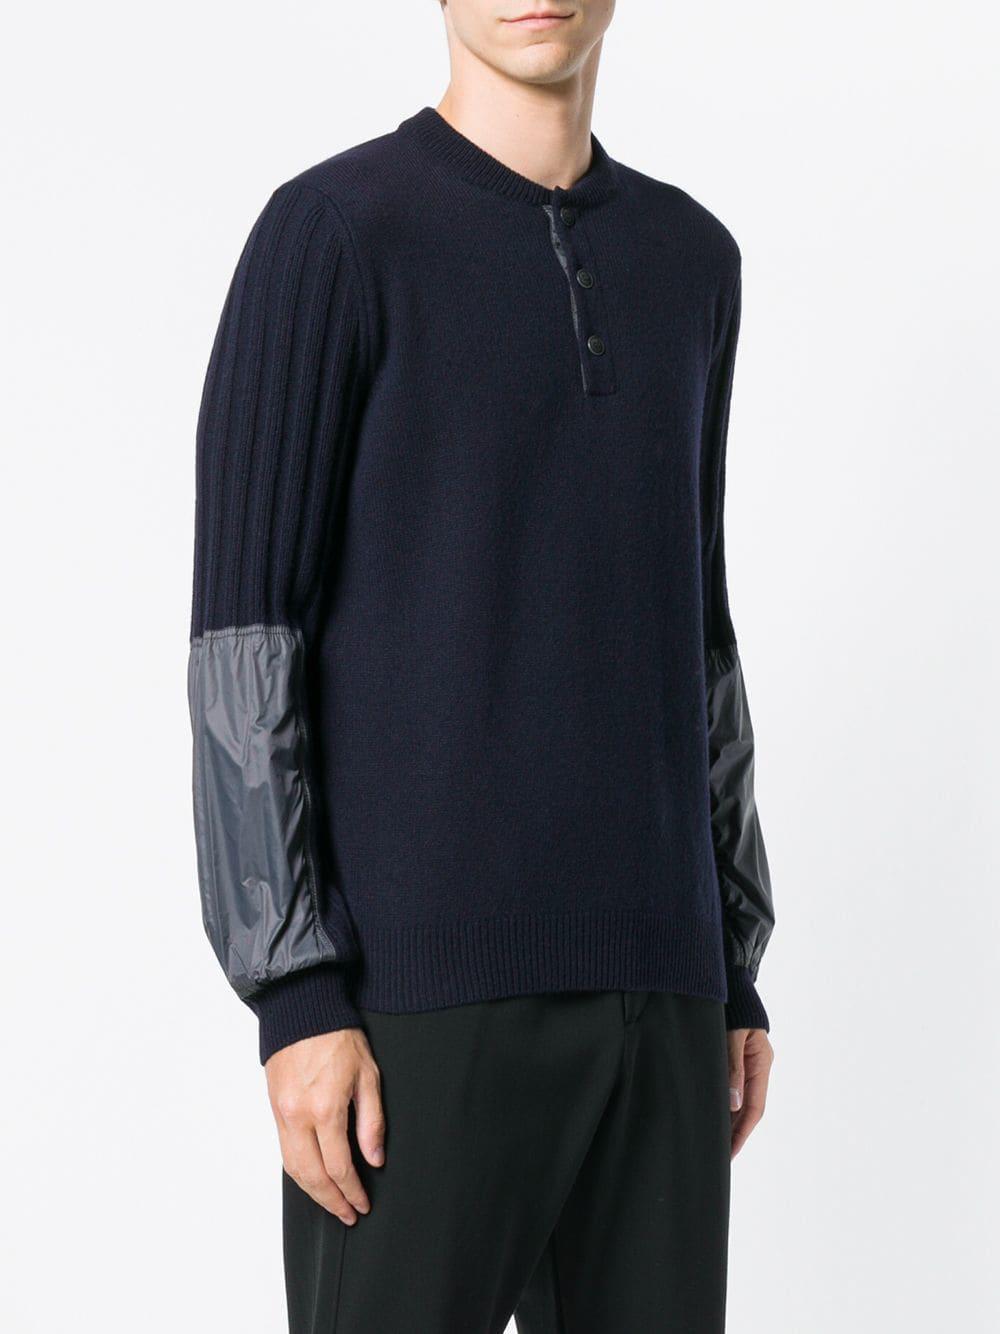 Giorgio Armani Ribbed Sleeve Sweater in Blue for Men - Lyst